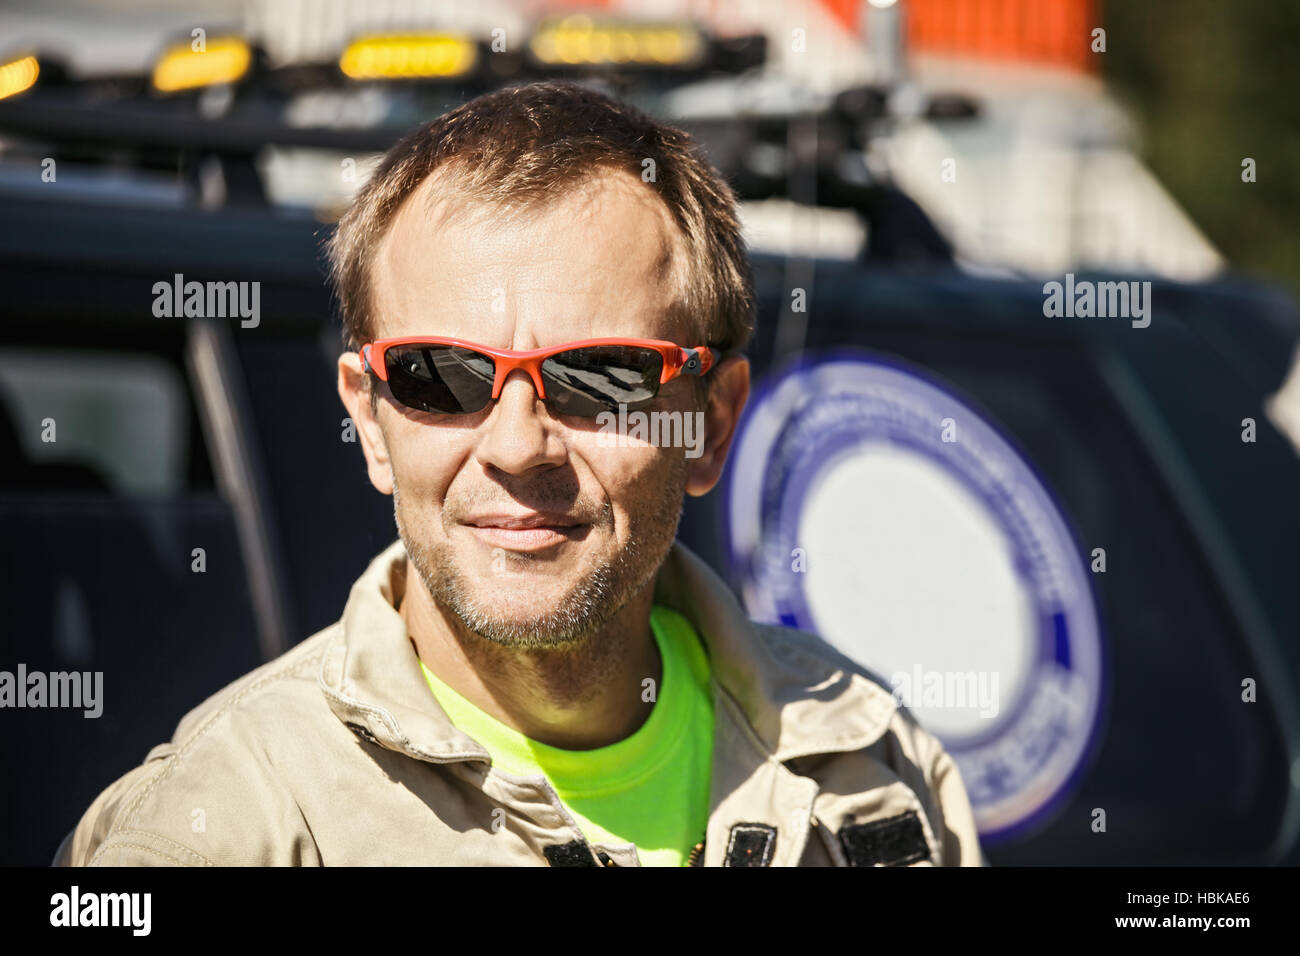 Portrait of rescuer at car Stock Photo